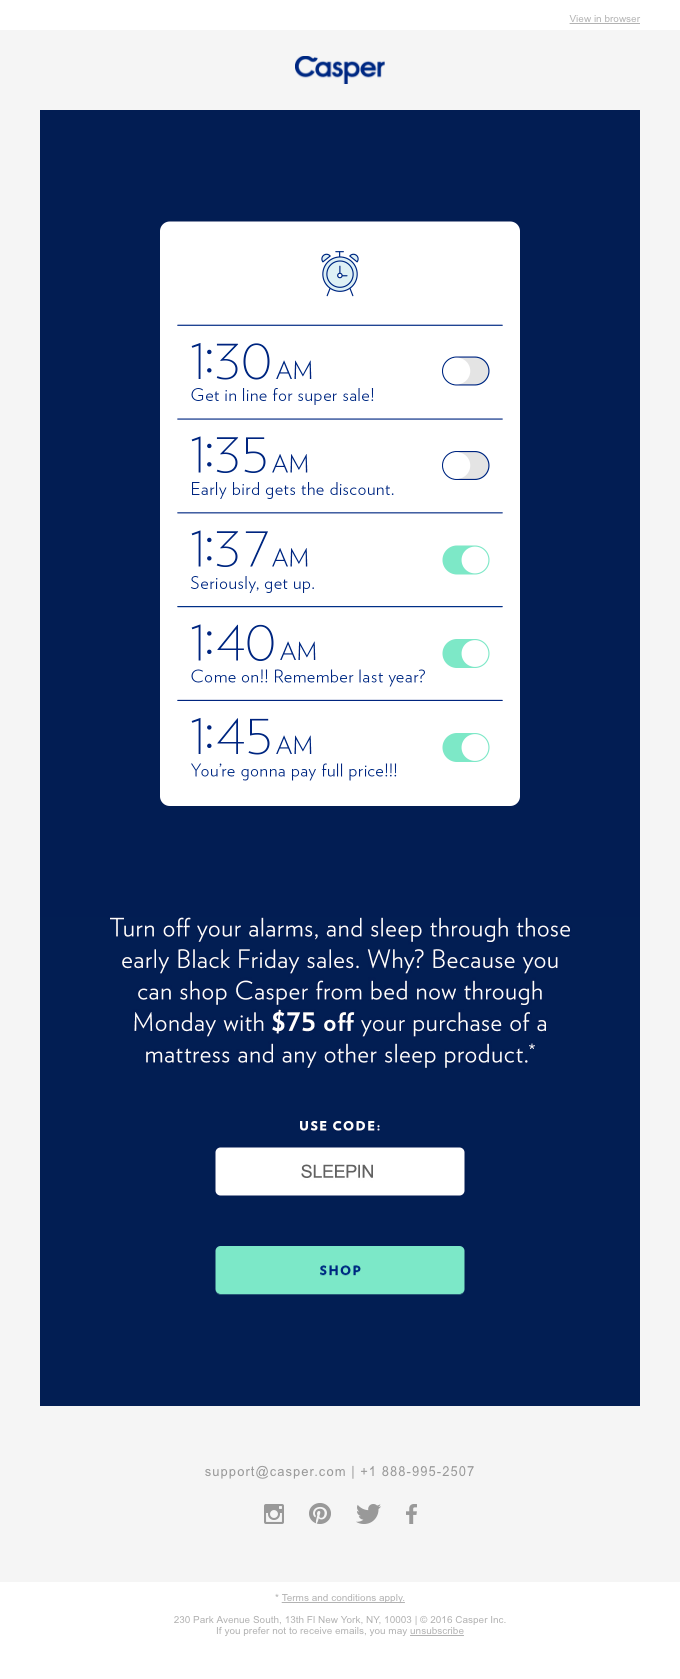 Snooze through the sales…